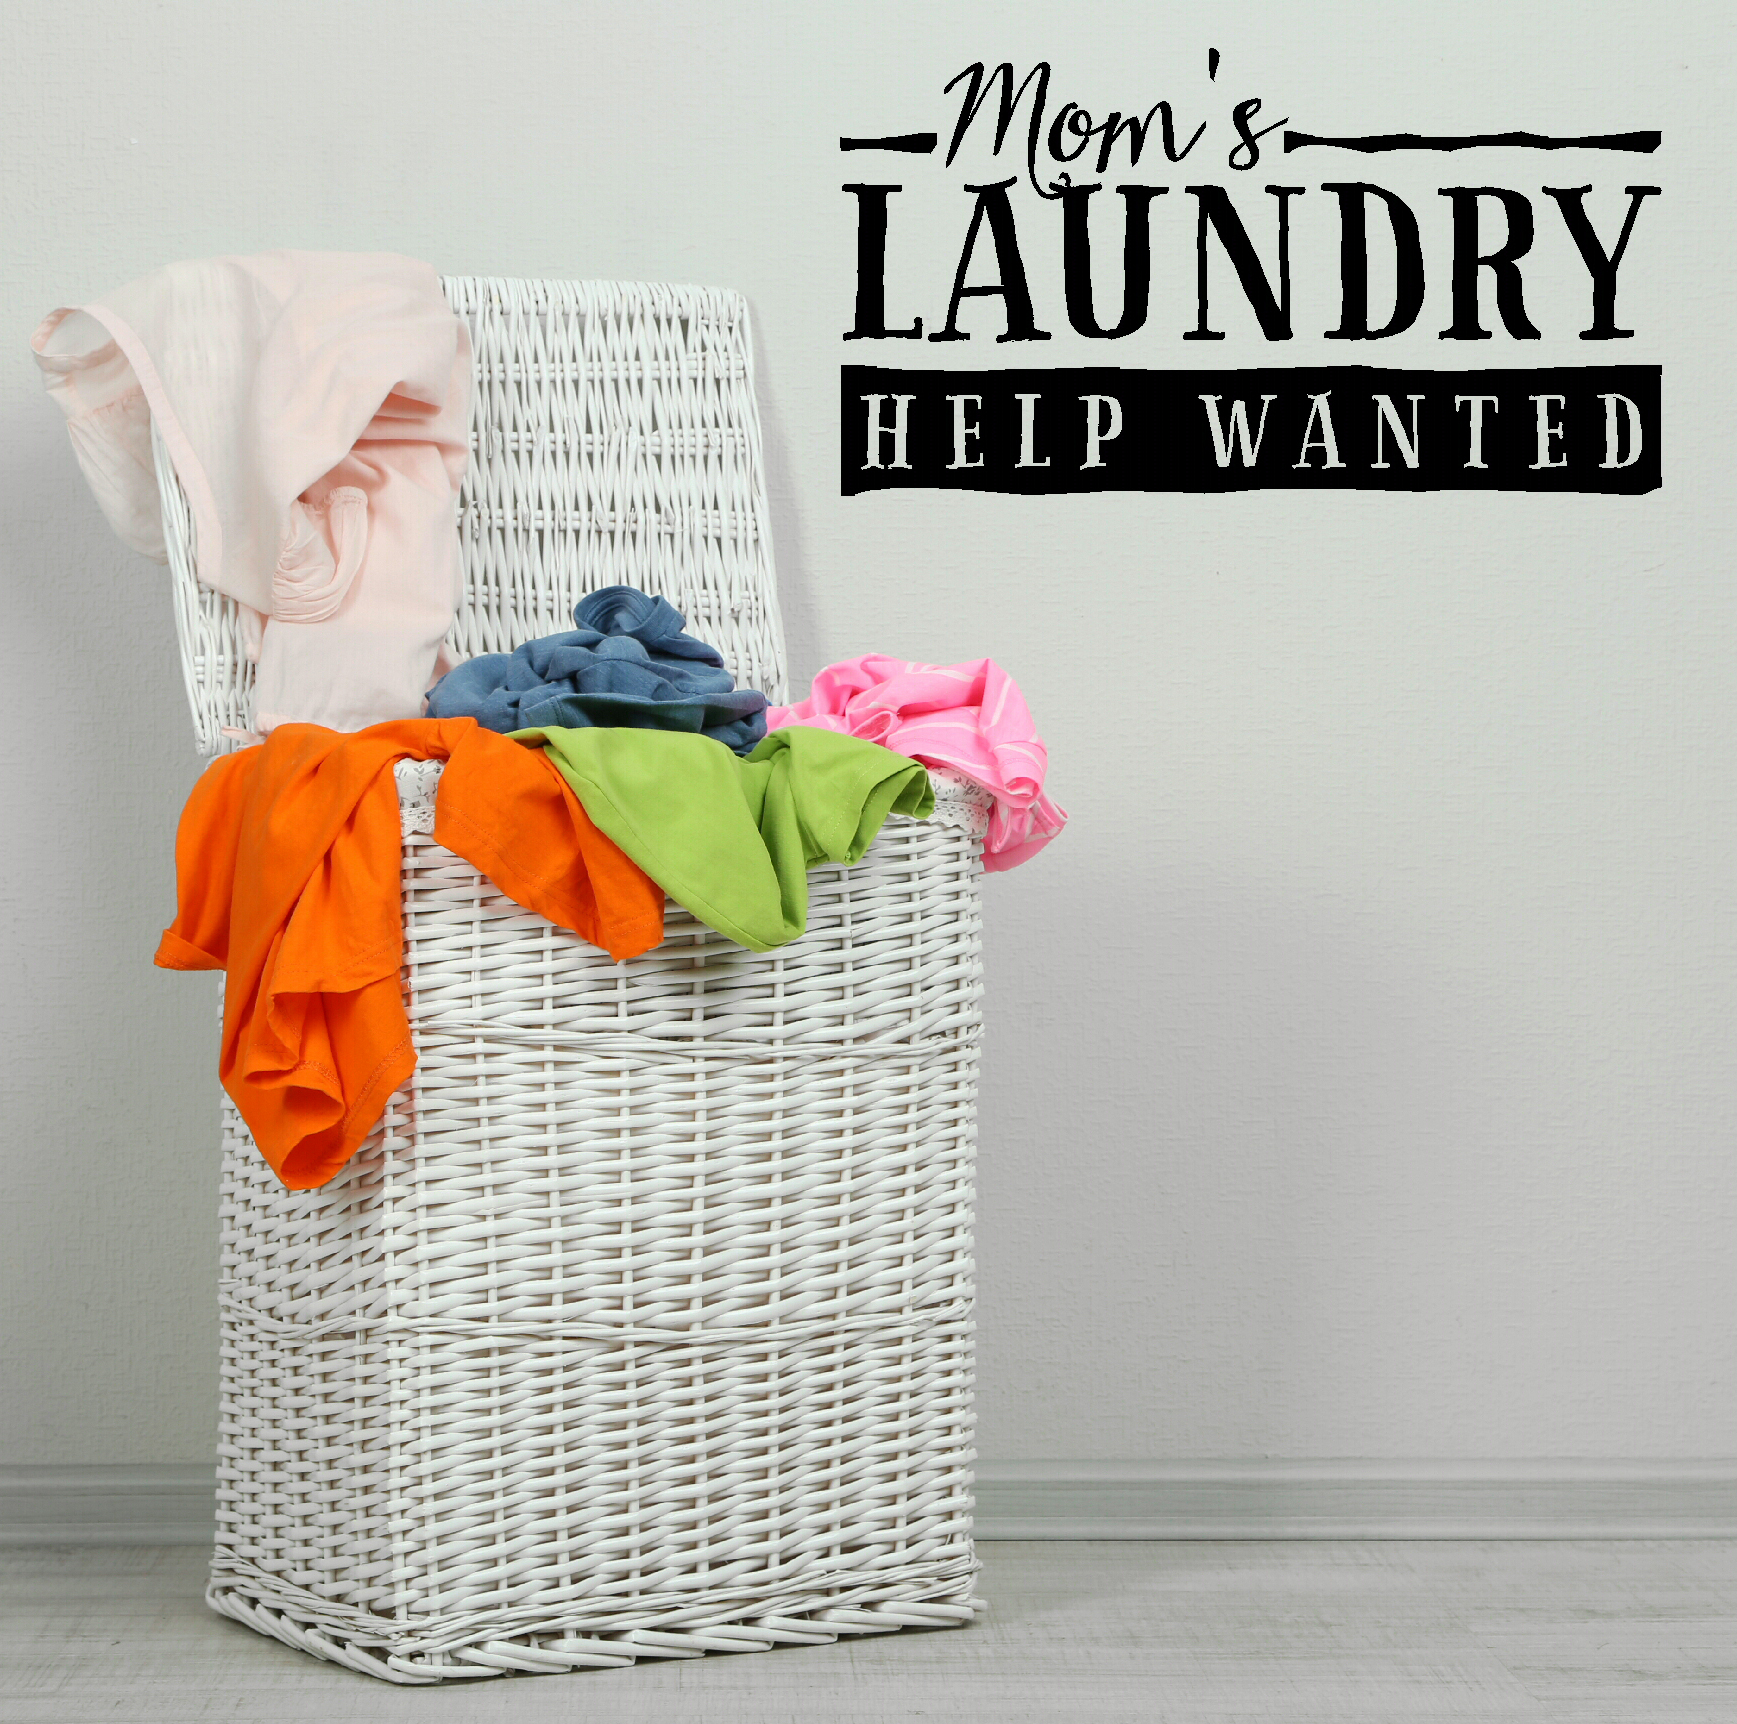 Mom's Laundry Help Wanted - Funny Laundry Wall Decal Quote